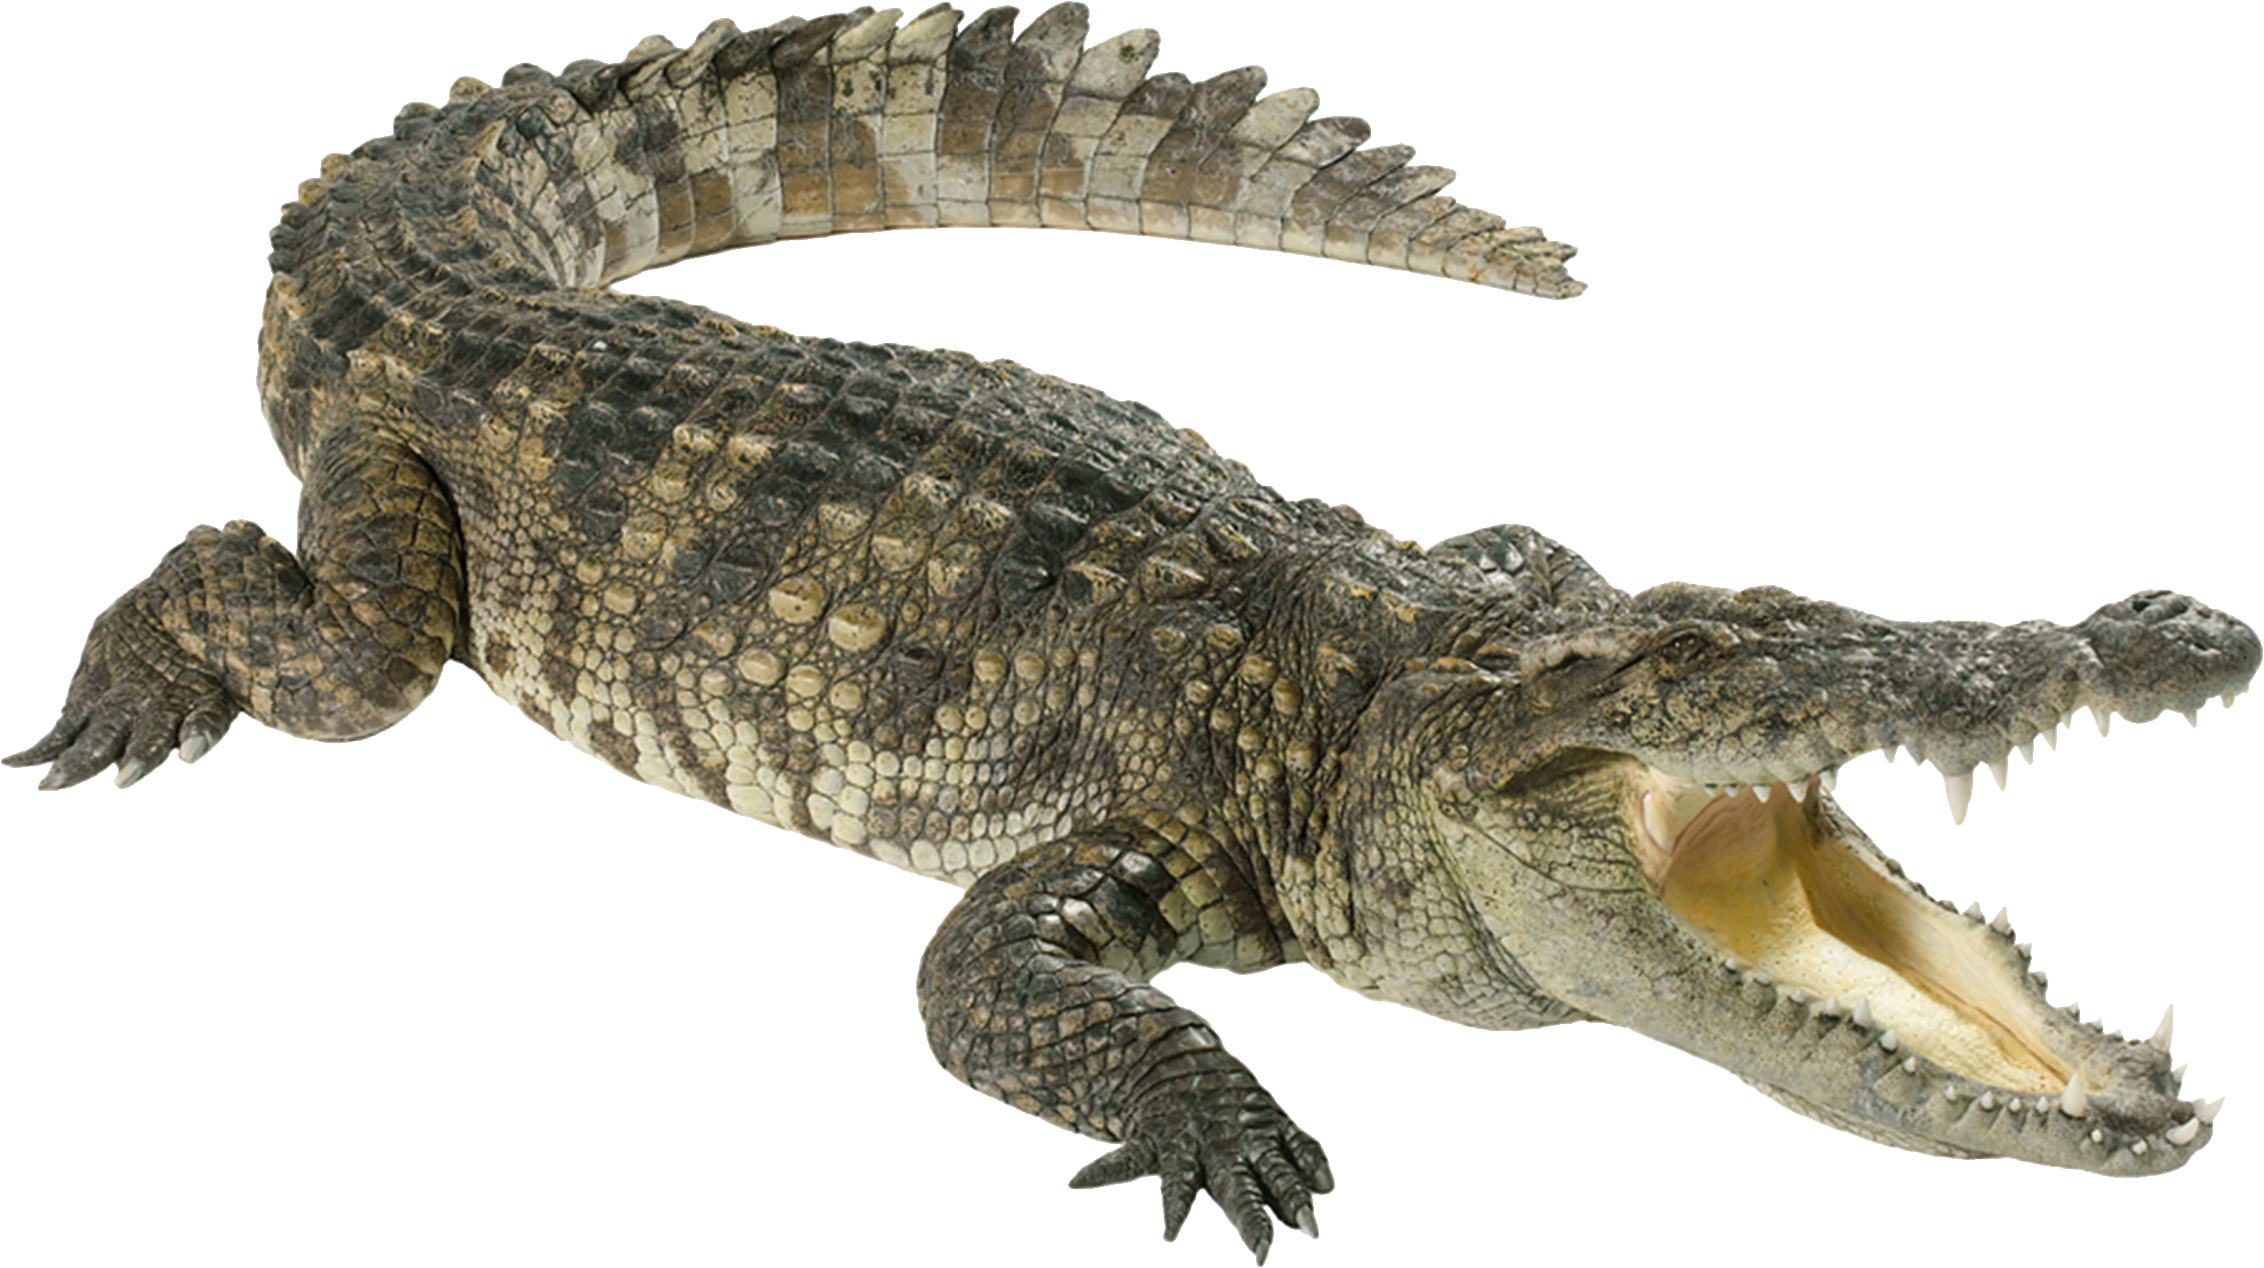 Gator clipart crocodile australian. Png images free download